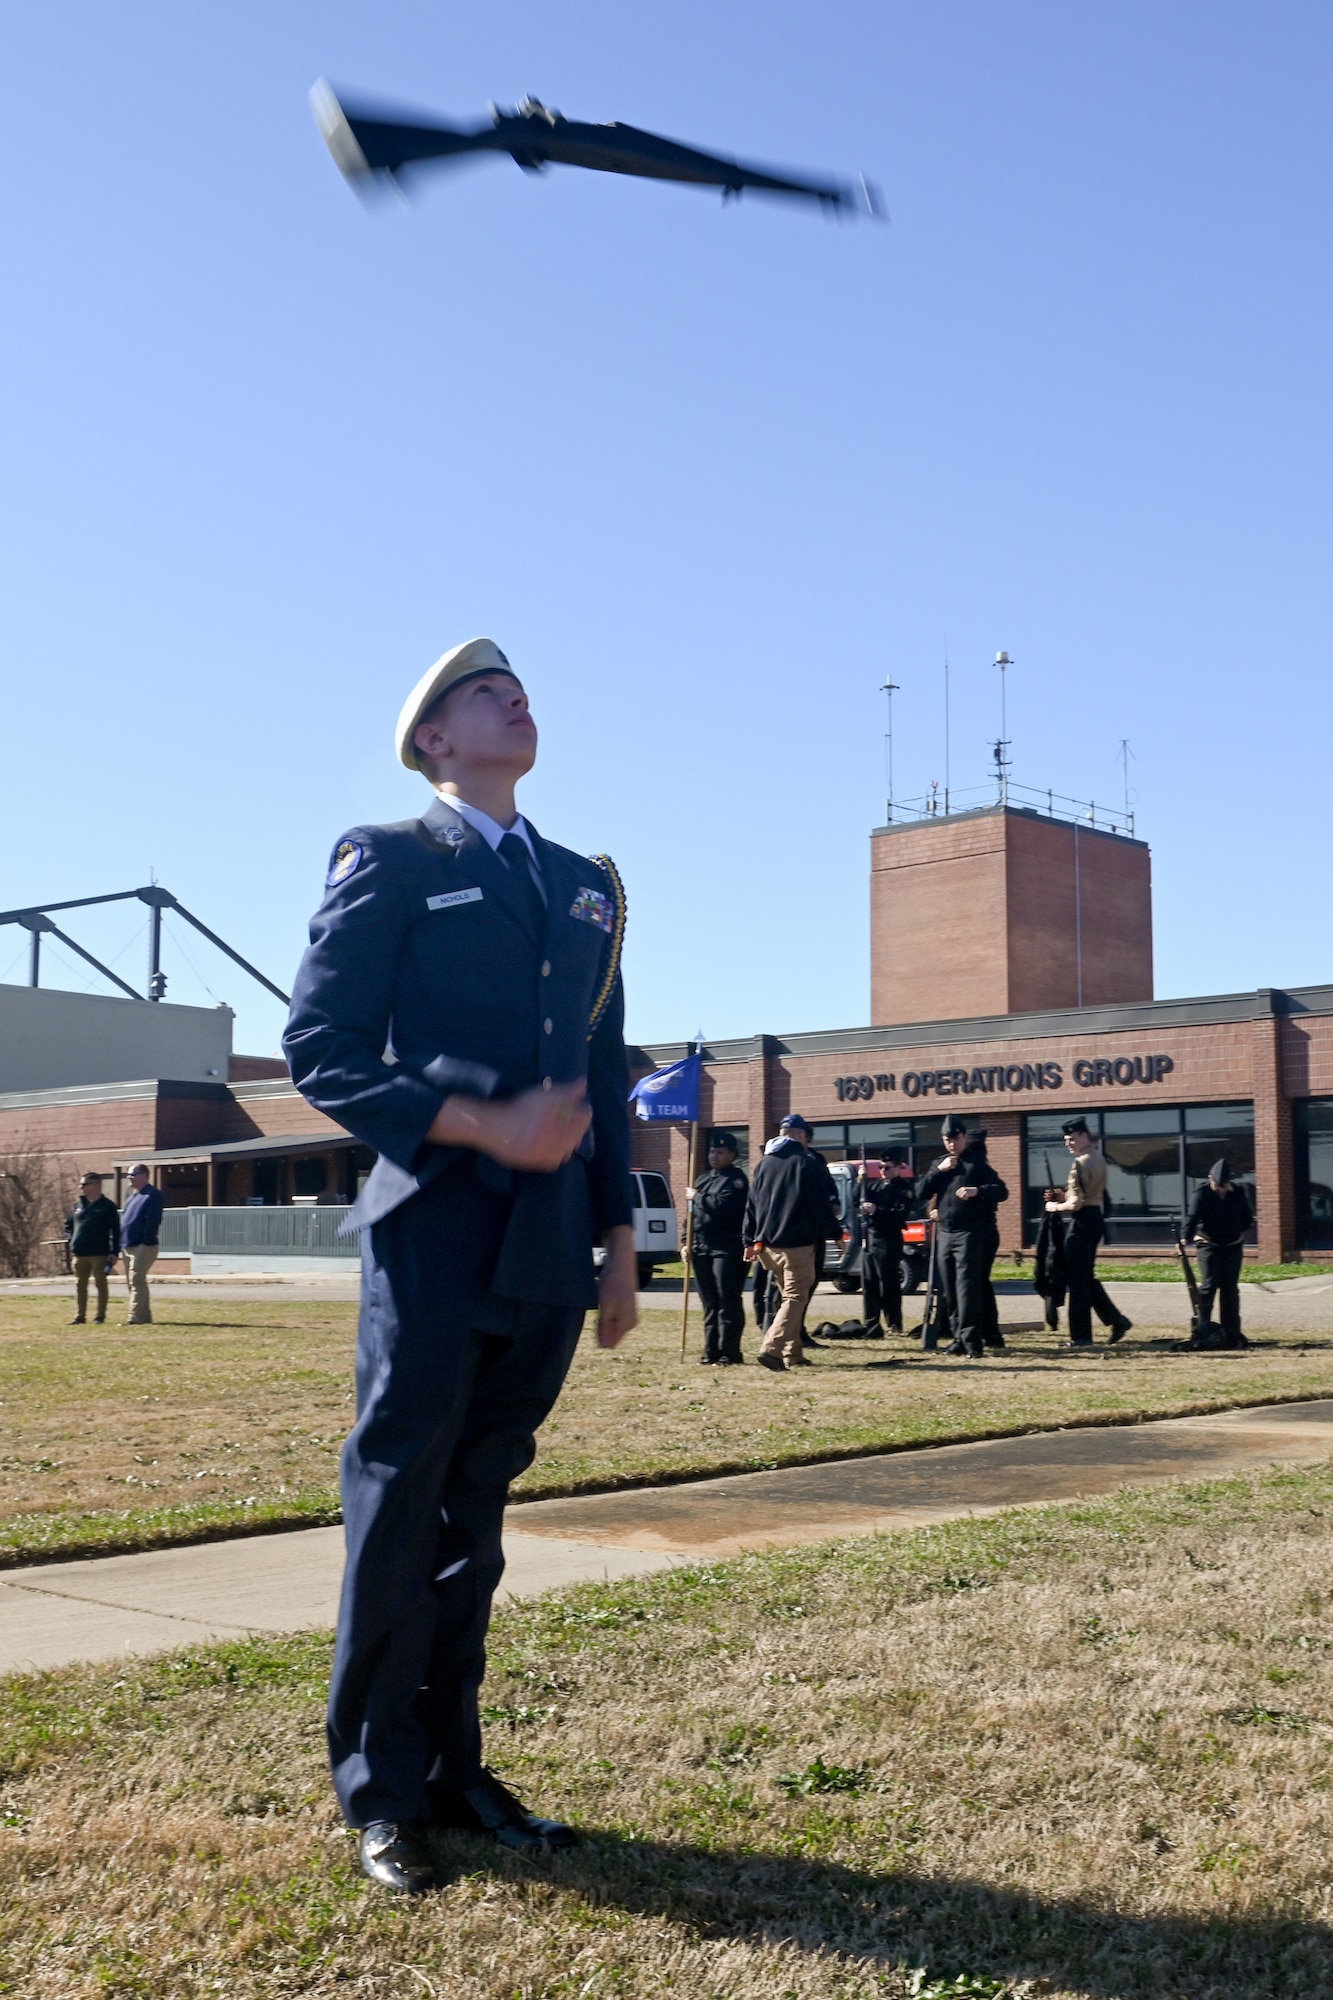 A student from the Sumter High School IDR Individual team from Sumter, South Carolina practices before his event during the annual Top Gun Drill Meet at McEntire Joint National Guard Base, South Carolina, March 26, 2022. High School Junior Reserve Officers Training Corps cadets from twenty high schools from across the state competed in twelve drill and ceremony events sponsored by the South Carolina Air National Guard. (U.S. Air National Guard photo by Tech. Sgt. Megan Floyd, 169th Fighter Wing Public Affairs)